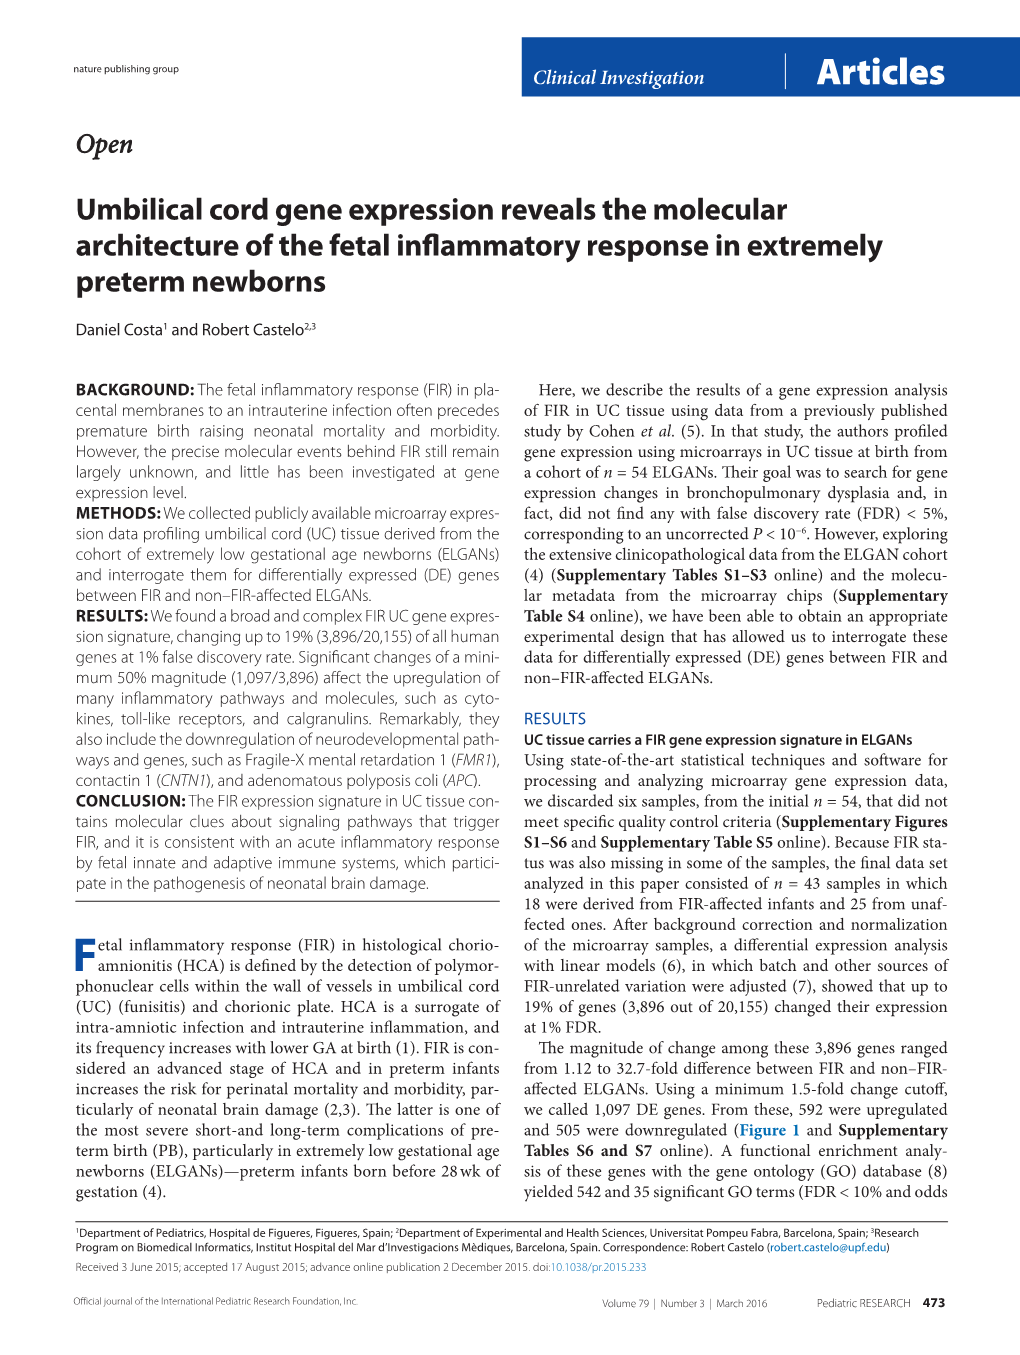 Umbilical Cord Gene Expression Reveals the Molecular Architecture of the Fetal Inflammatory Response in Extremely Preterm Newborns